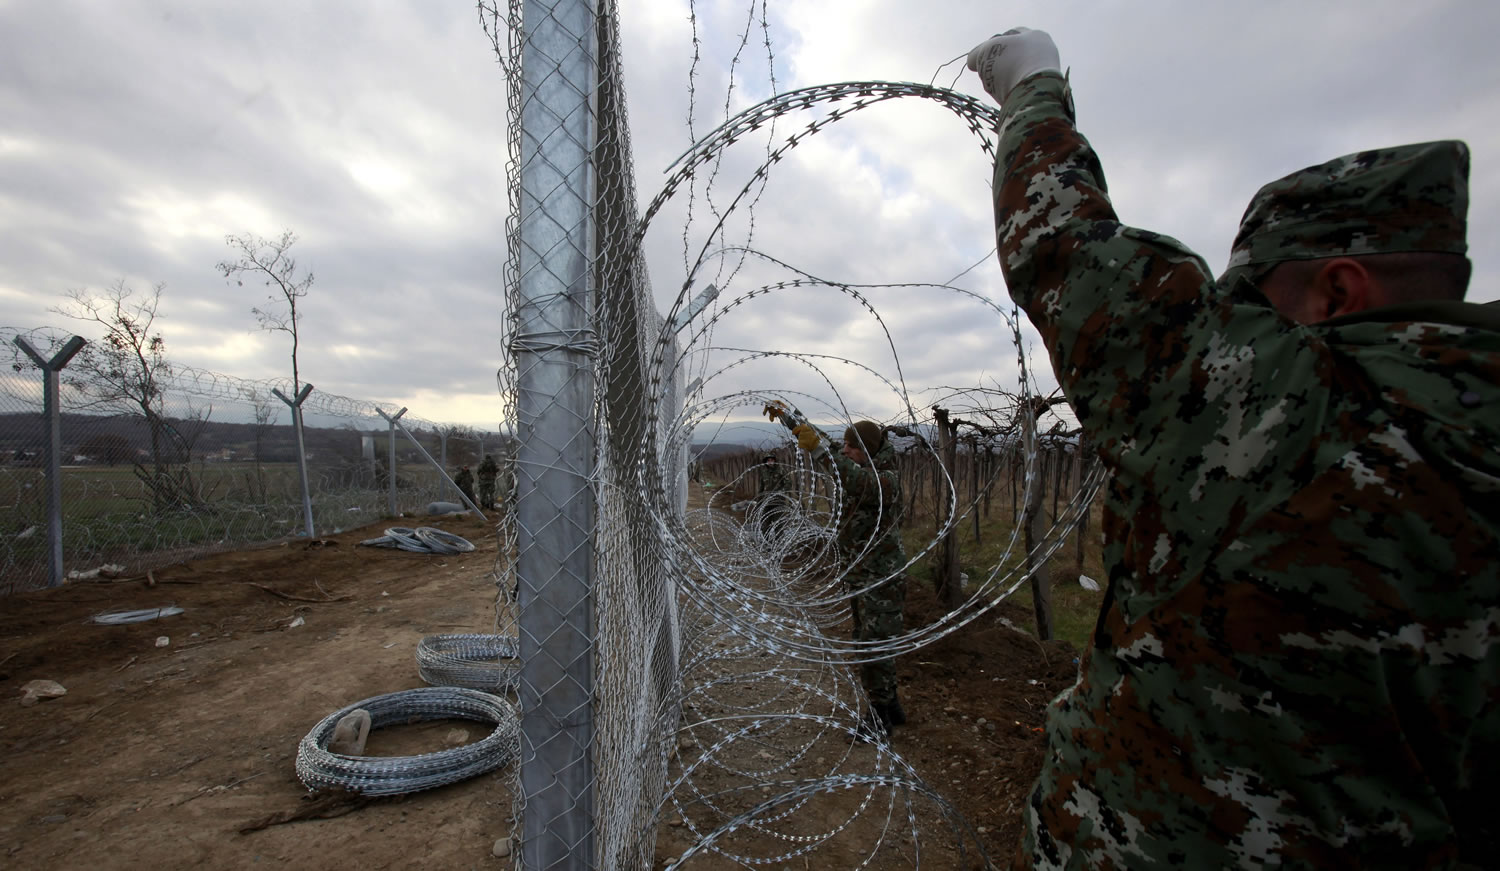 Macedonian Army soldiers attach a razor wire to a fence on Feb. 8 on the border line with Greece, near the southern Macedonian town of Gevgelija, Six nations from Central and Eastern Europe meet Monday in Prague to discuss plans for a new &quot;line of defense&quot; for Europe that involves a double fence along Greece&#039;s northern border.